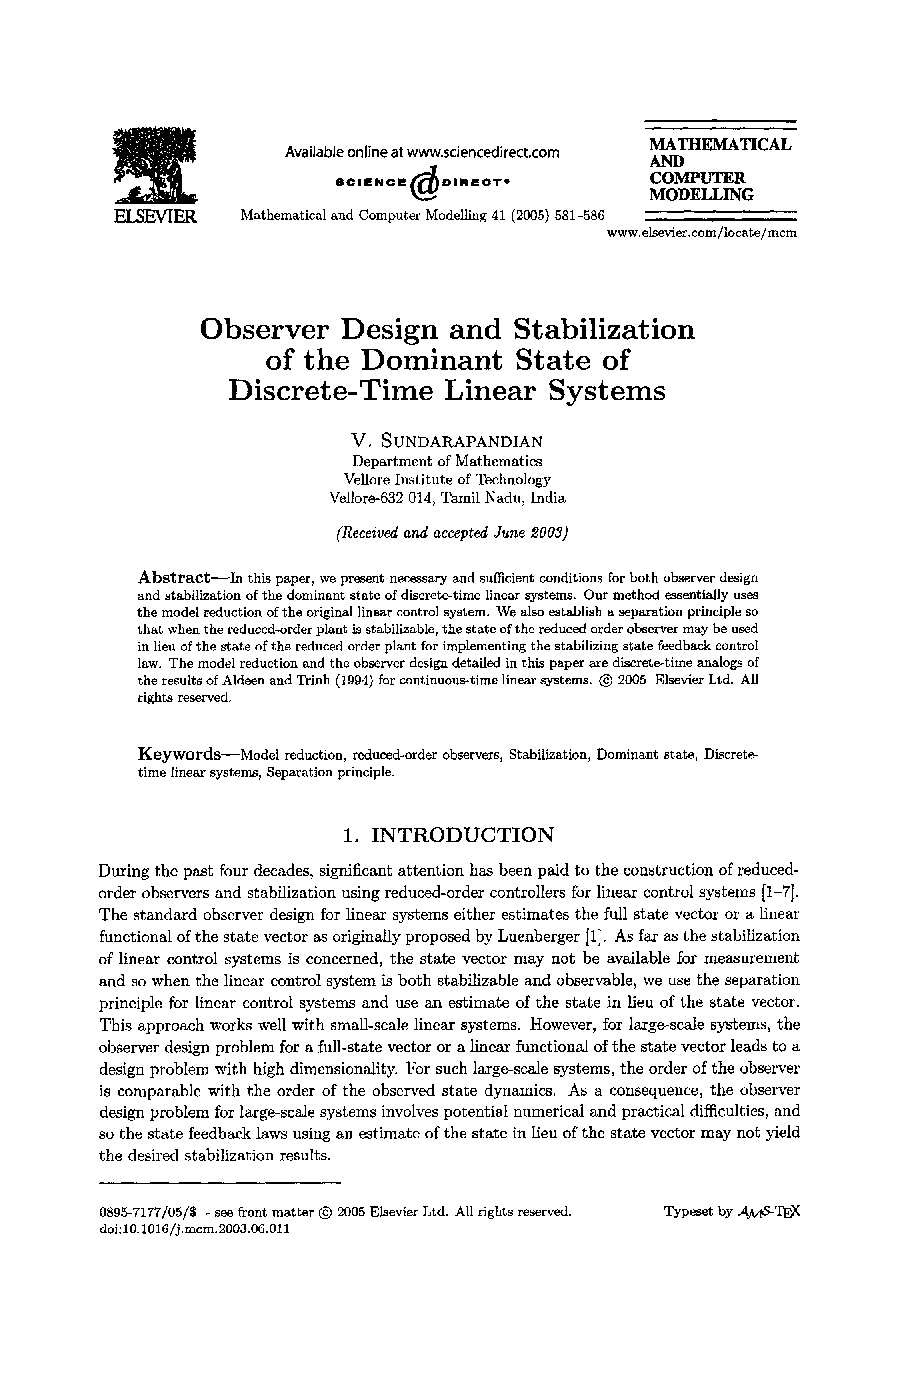 Observer design and stabilization of the dominant state of discrete-time linear systems